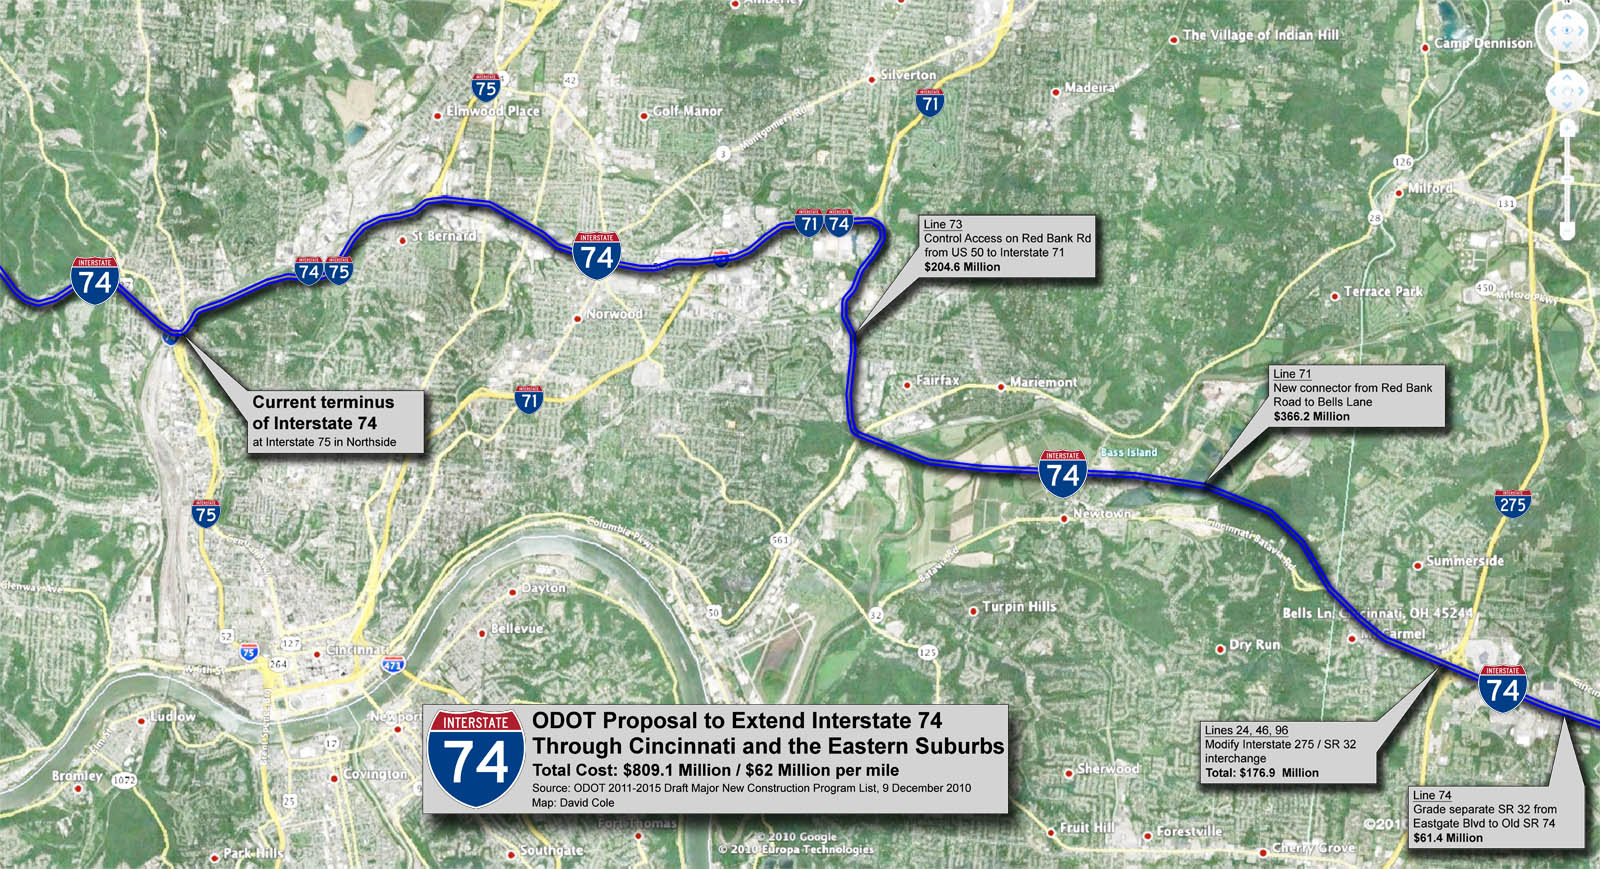 odot-tags-809-million-for-possible-i-74-extension-in-cincinnati